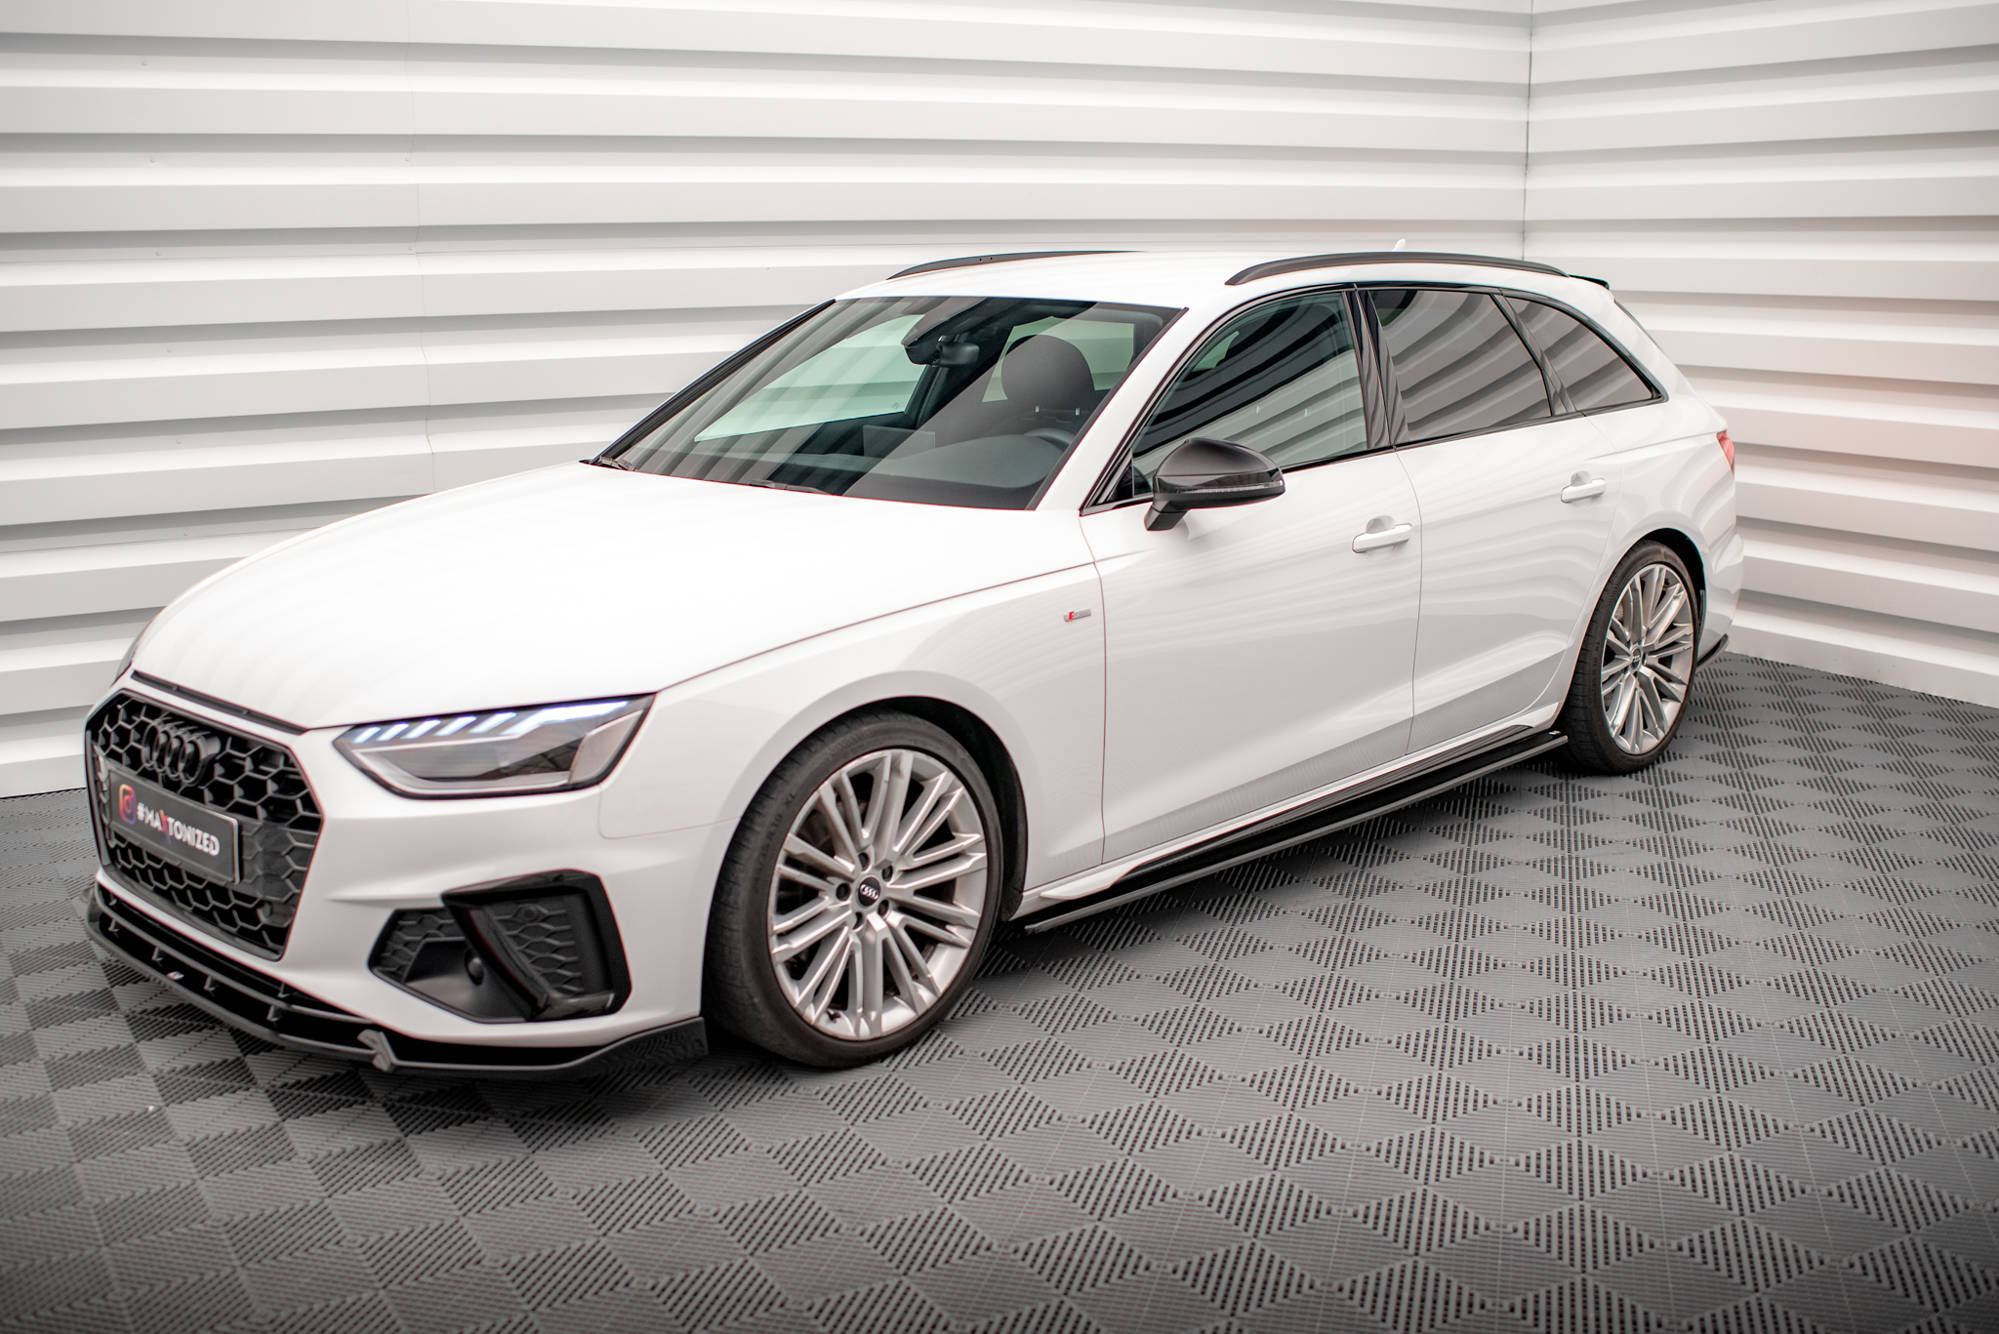 https://maxtondesign.com/eng_pl_Side-Skirts-Diffusers-Audi-S4-A4-S-Line-A4-Competiton-B9-8089_3.jpg